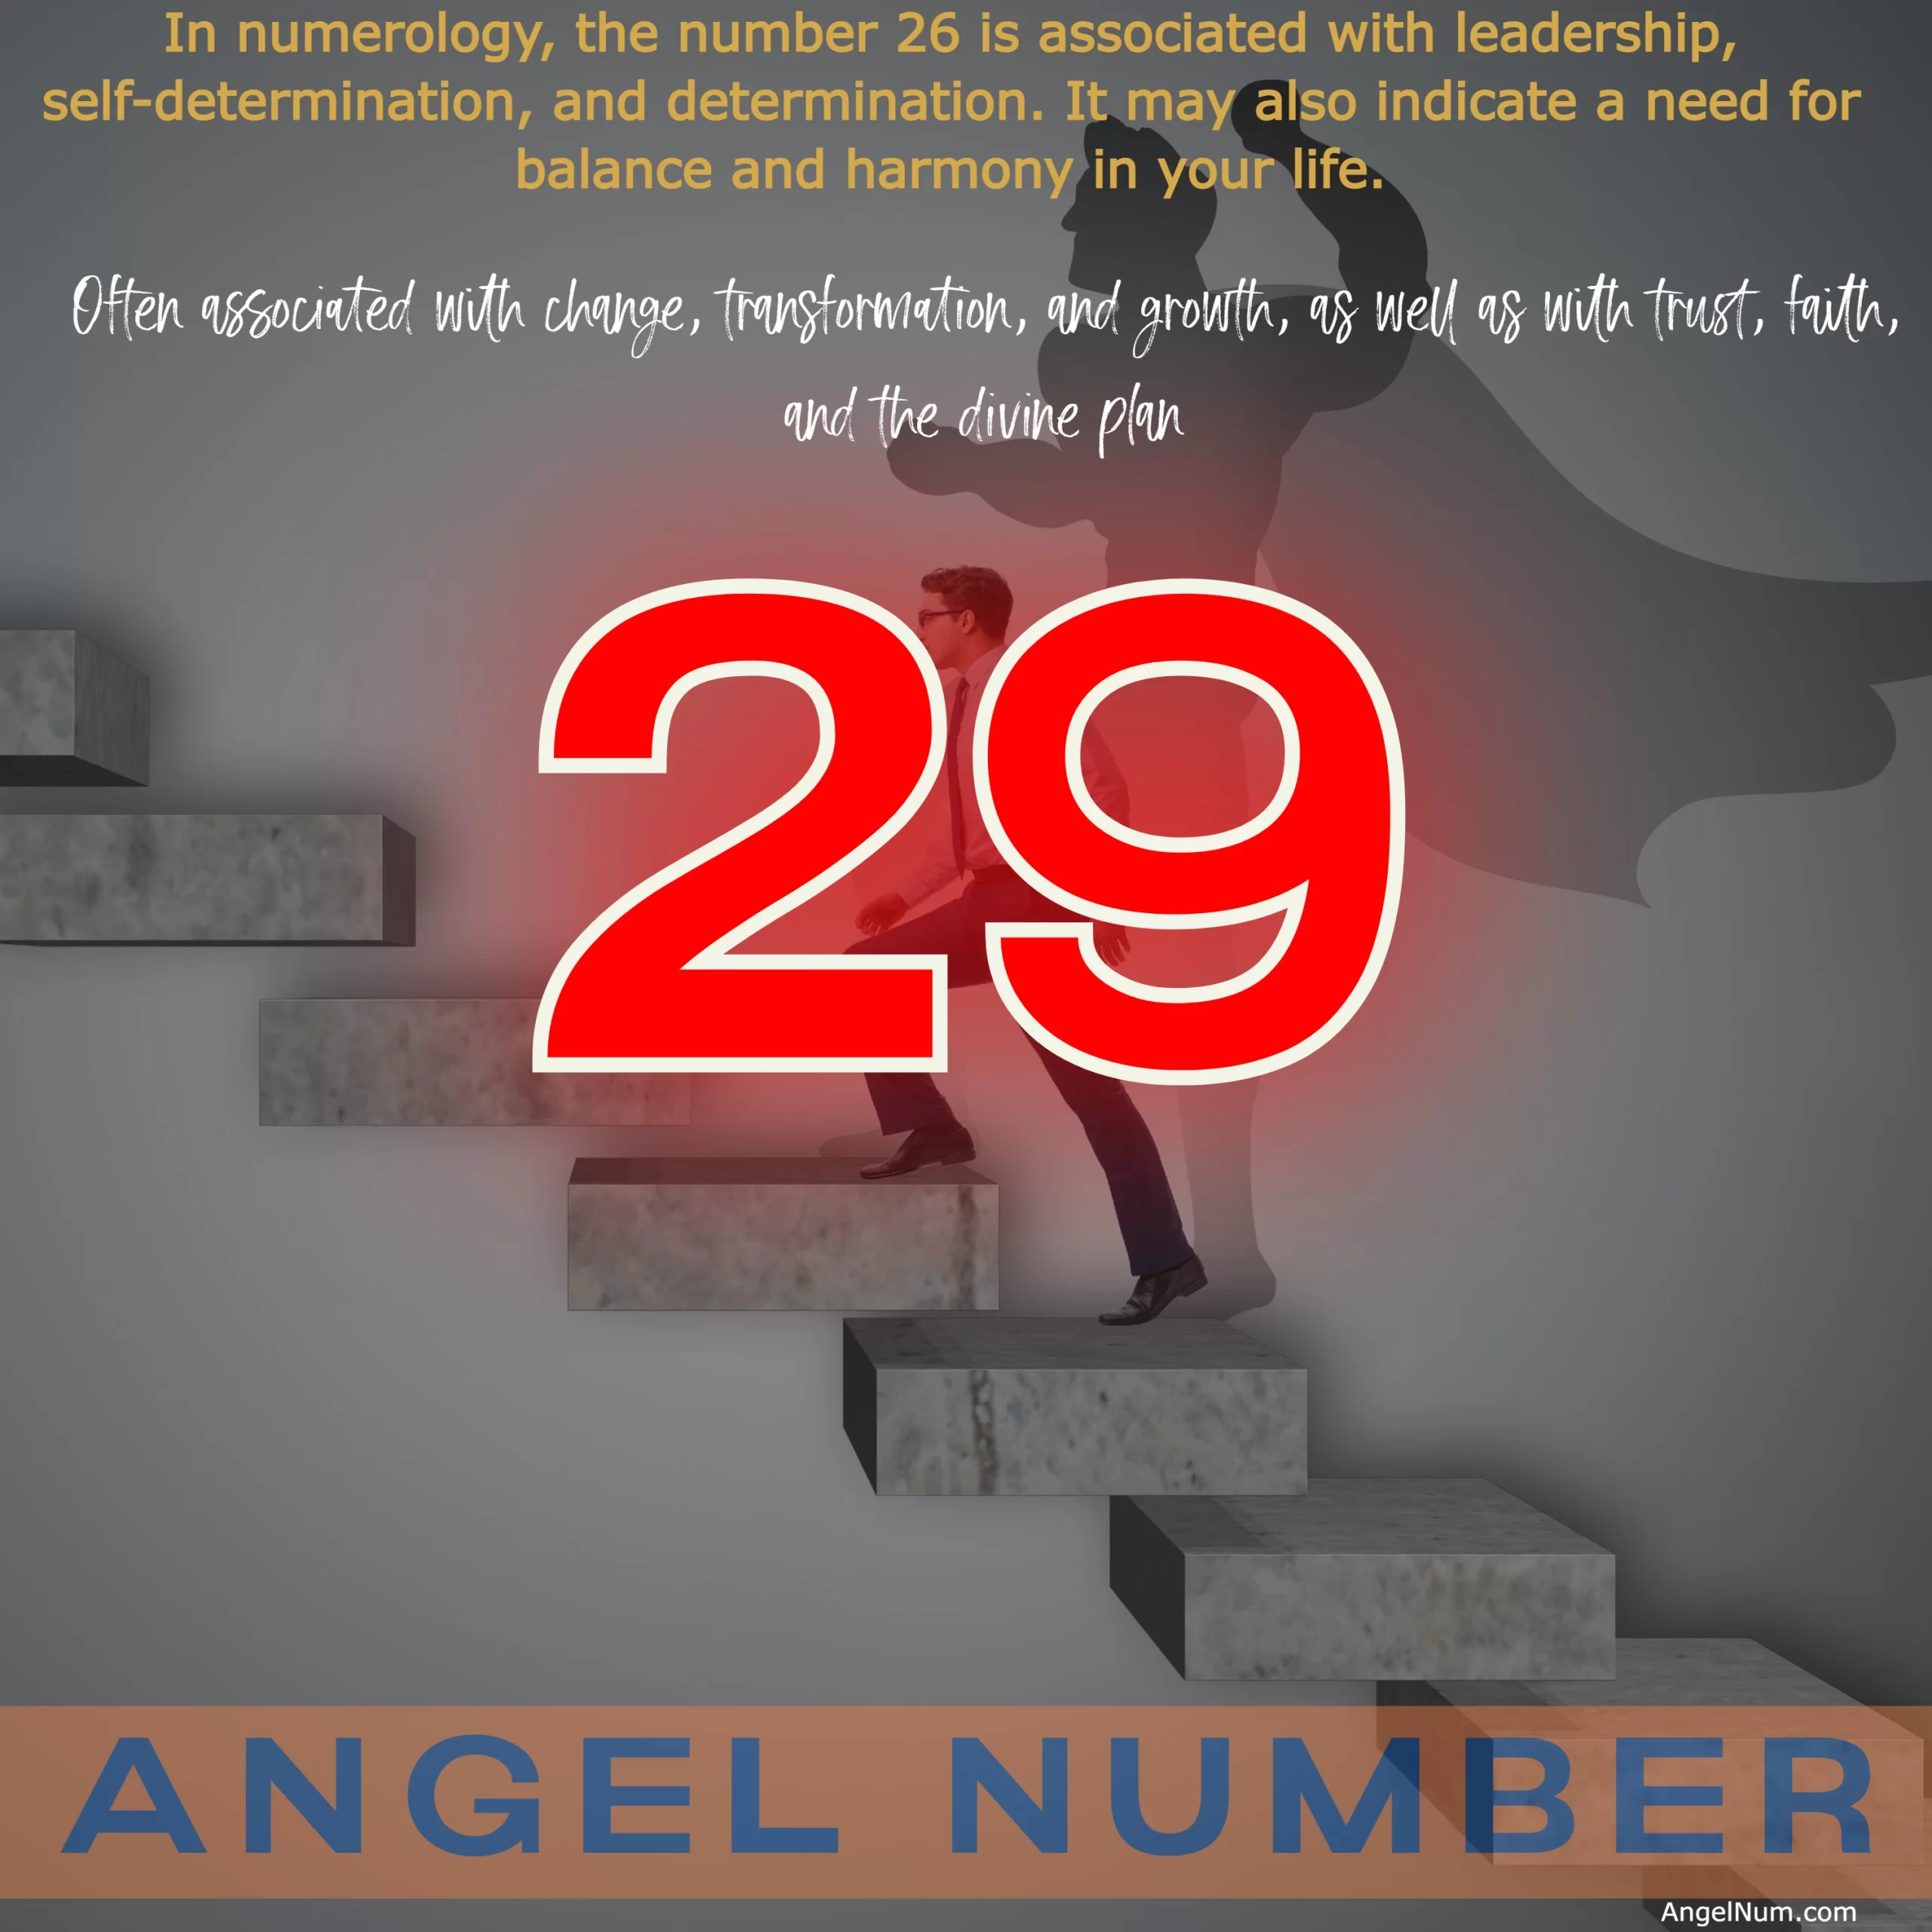 Discover the Meaning and Symbolism of Angel Number 29